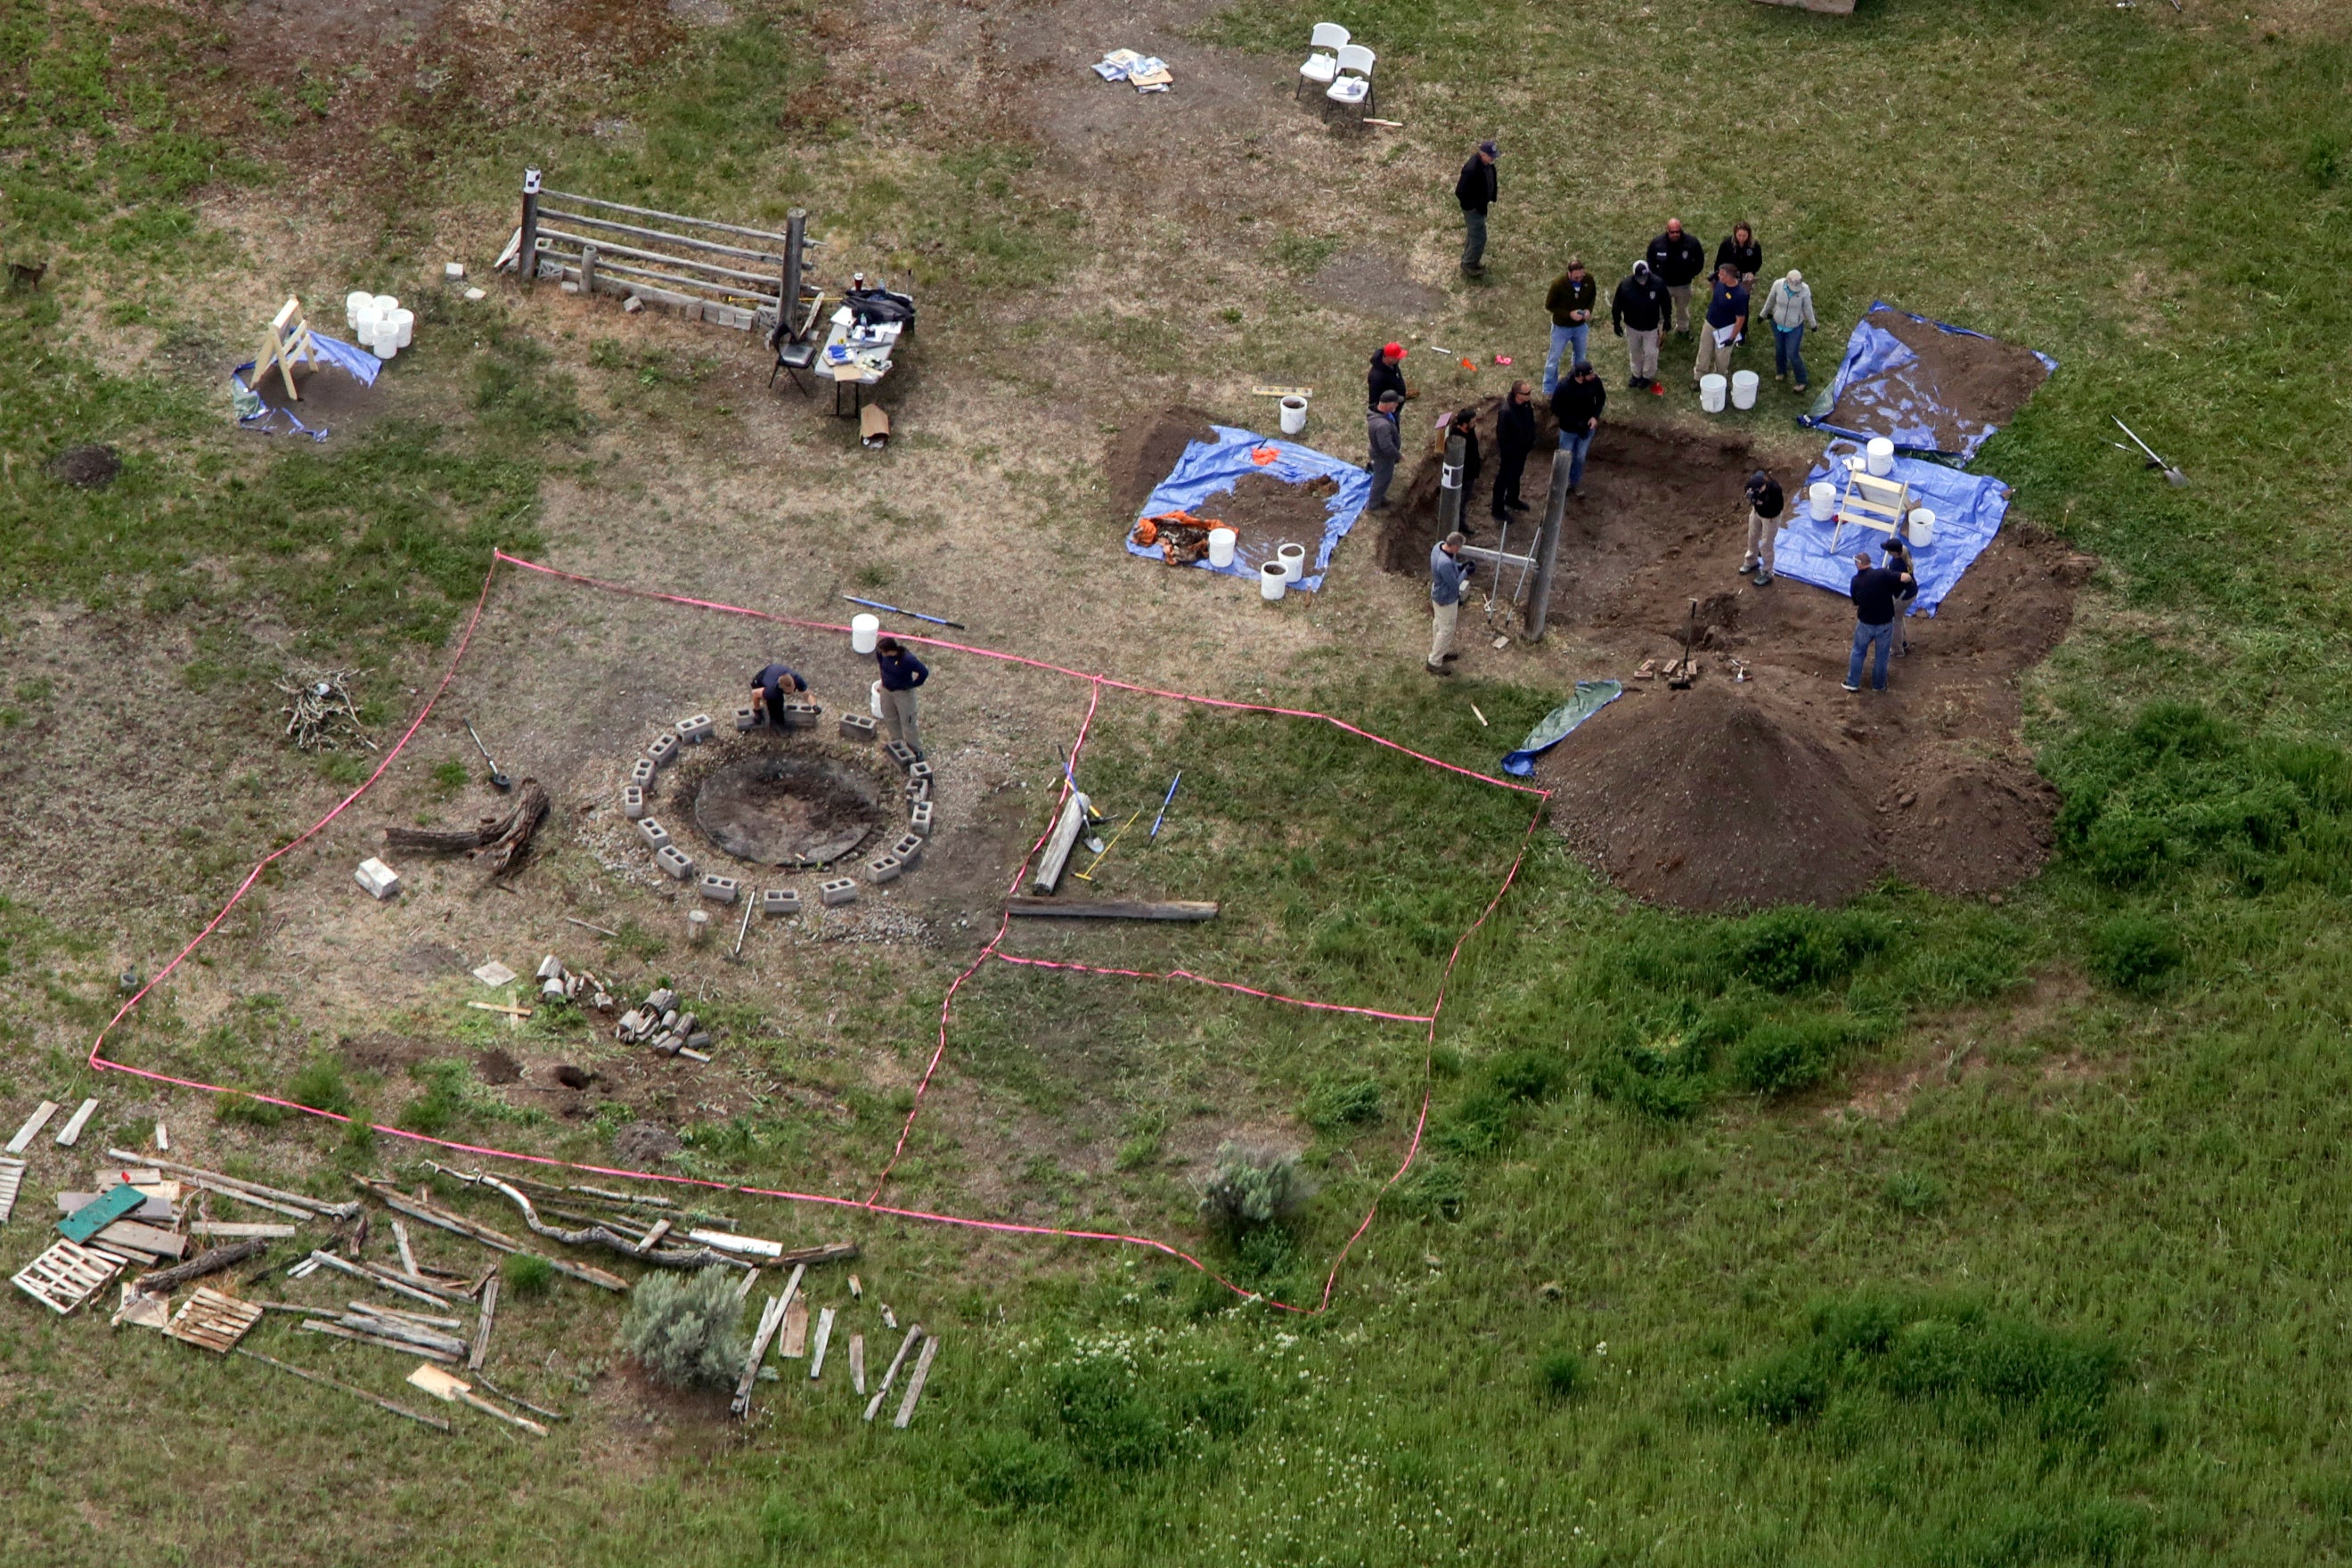 Investigators are seen digging up the bodies of JJ and Tylee in June 2020